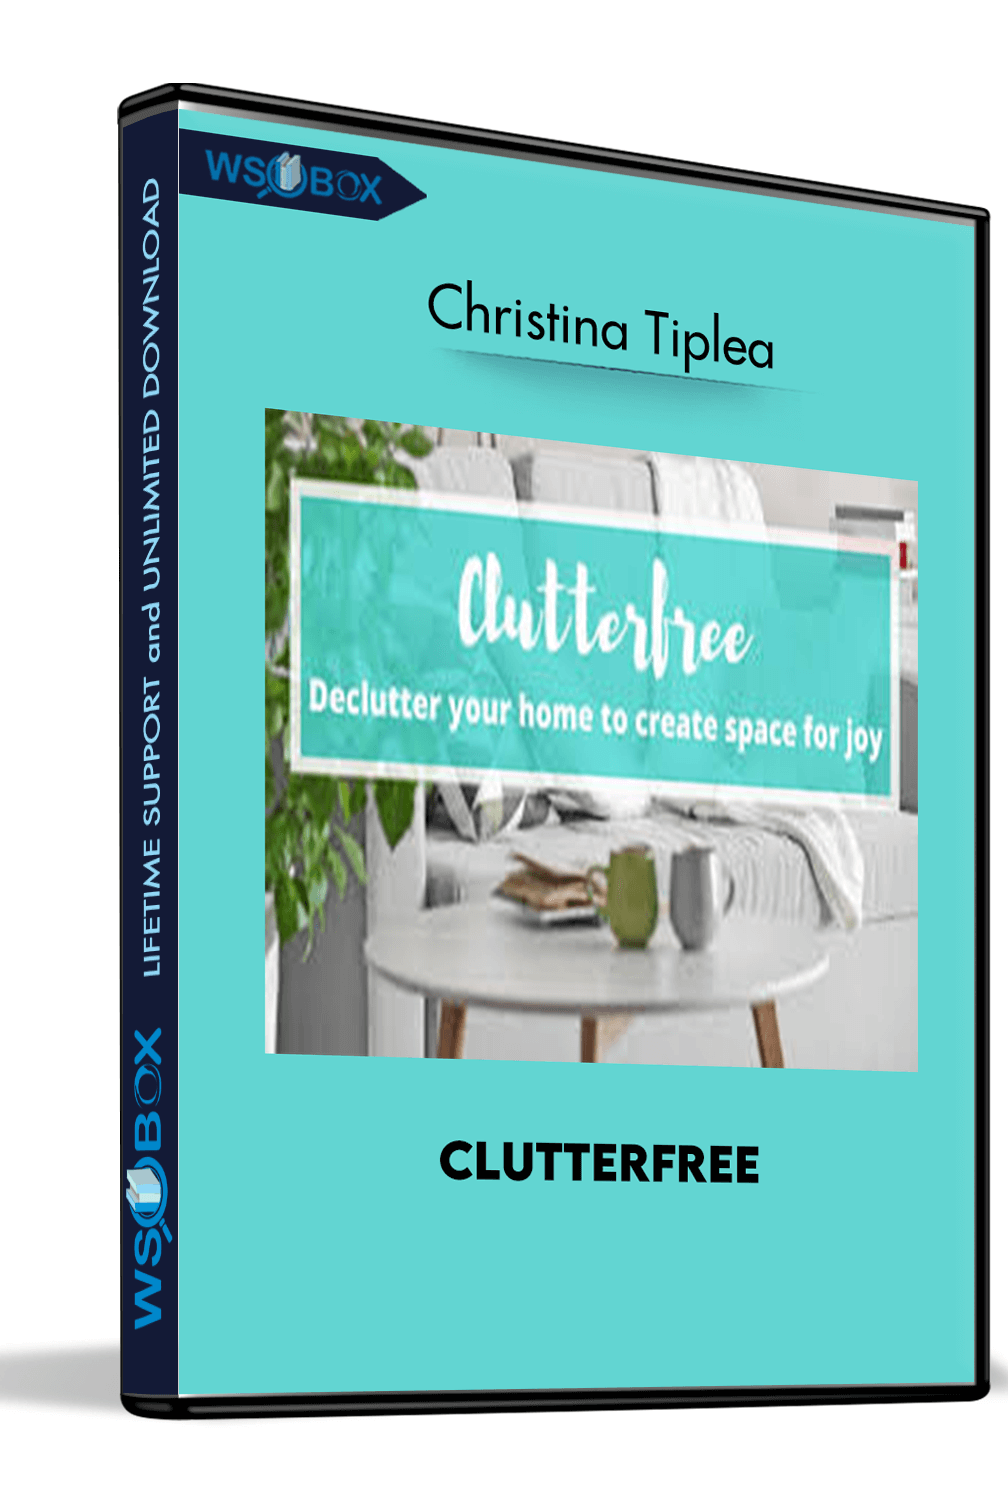 clutterfree-christina-tiplea